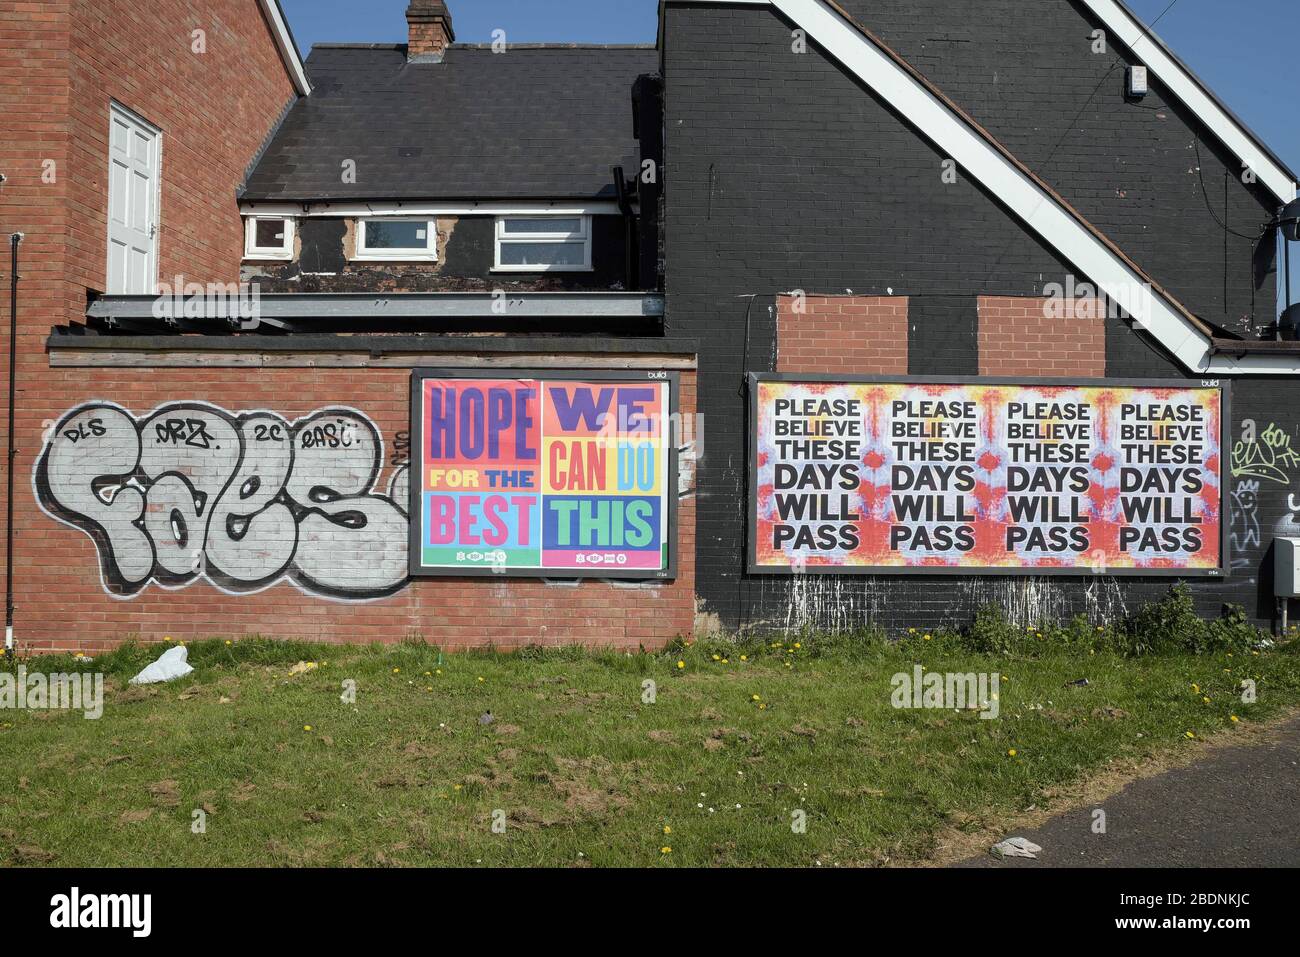 Birmingham, West Midlands, UK. 8th Apr, 2020. Positive posters that are on display in Hall Green, Birmingham showing people 'Please believe these days will pass' and to 'Hope for the best' and 'We can do this'. Credit: Sam Holiday/Alamy Live News Stock Photo